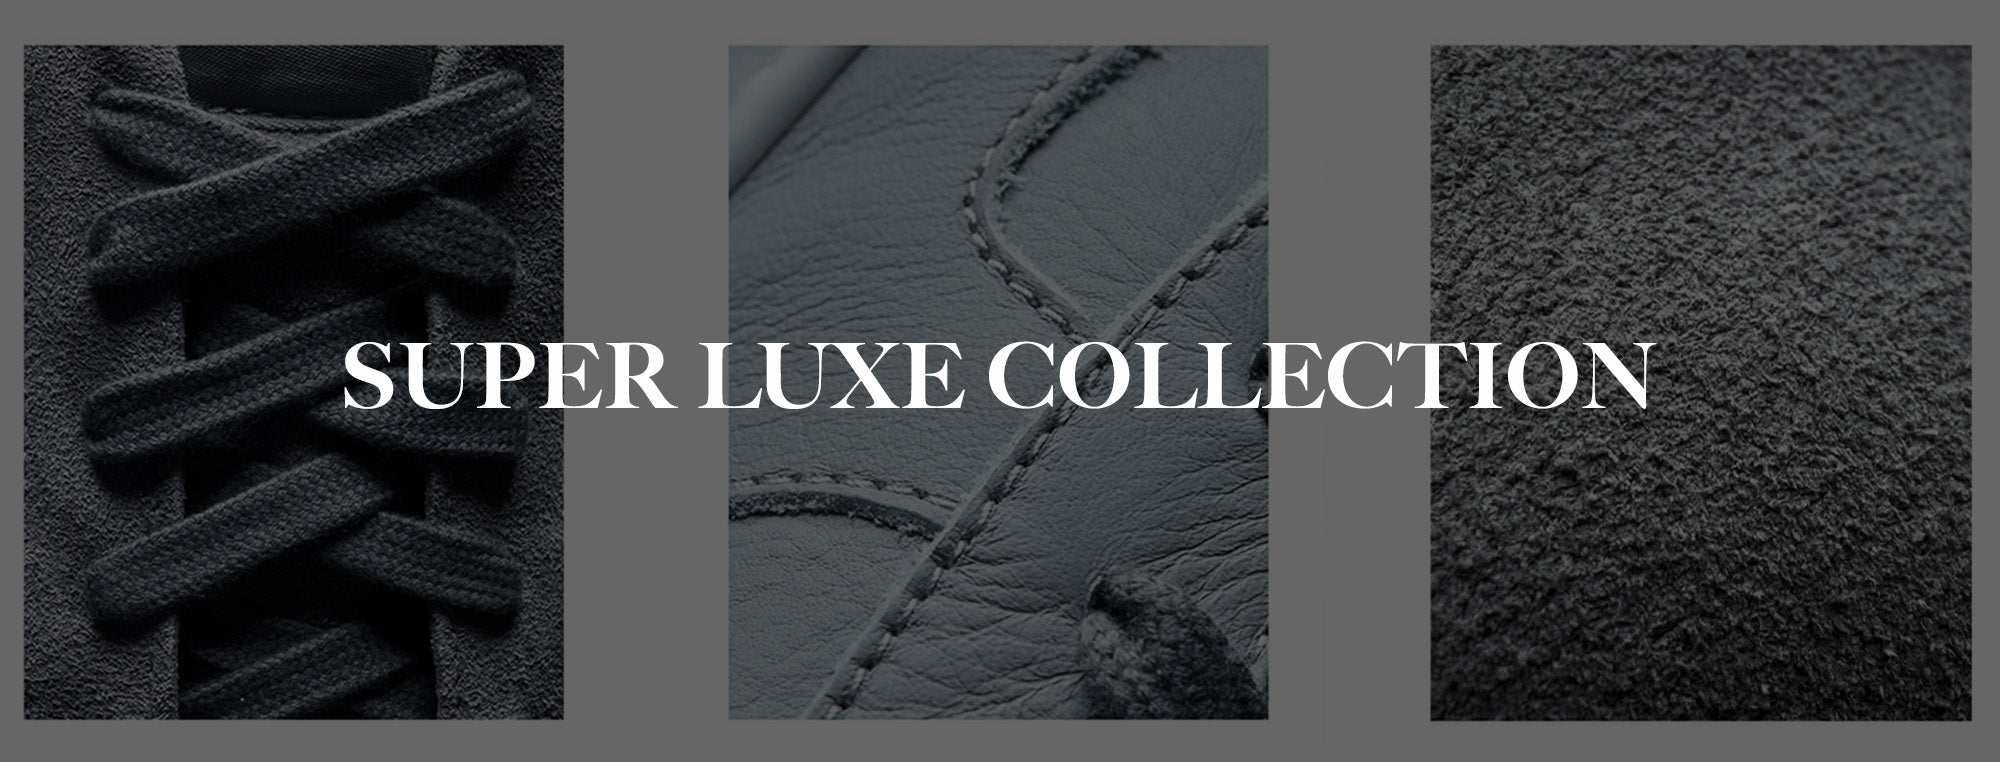 Super Luxe Collection